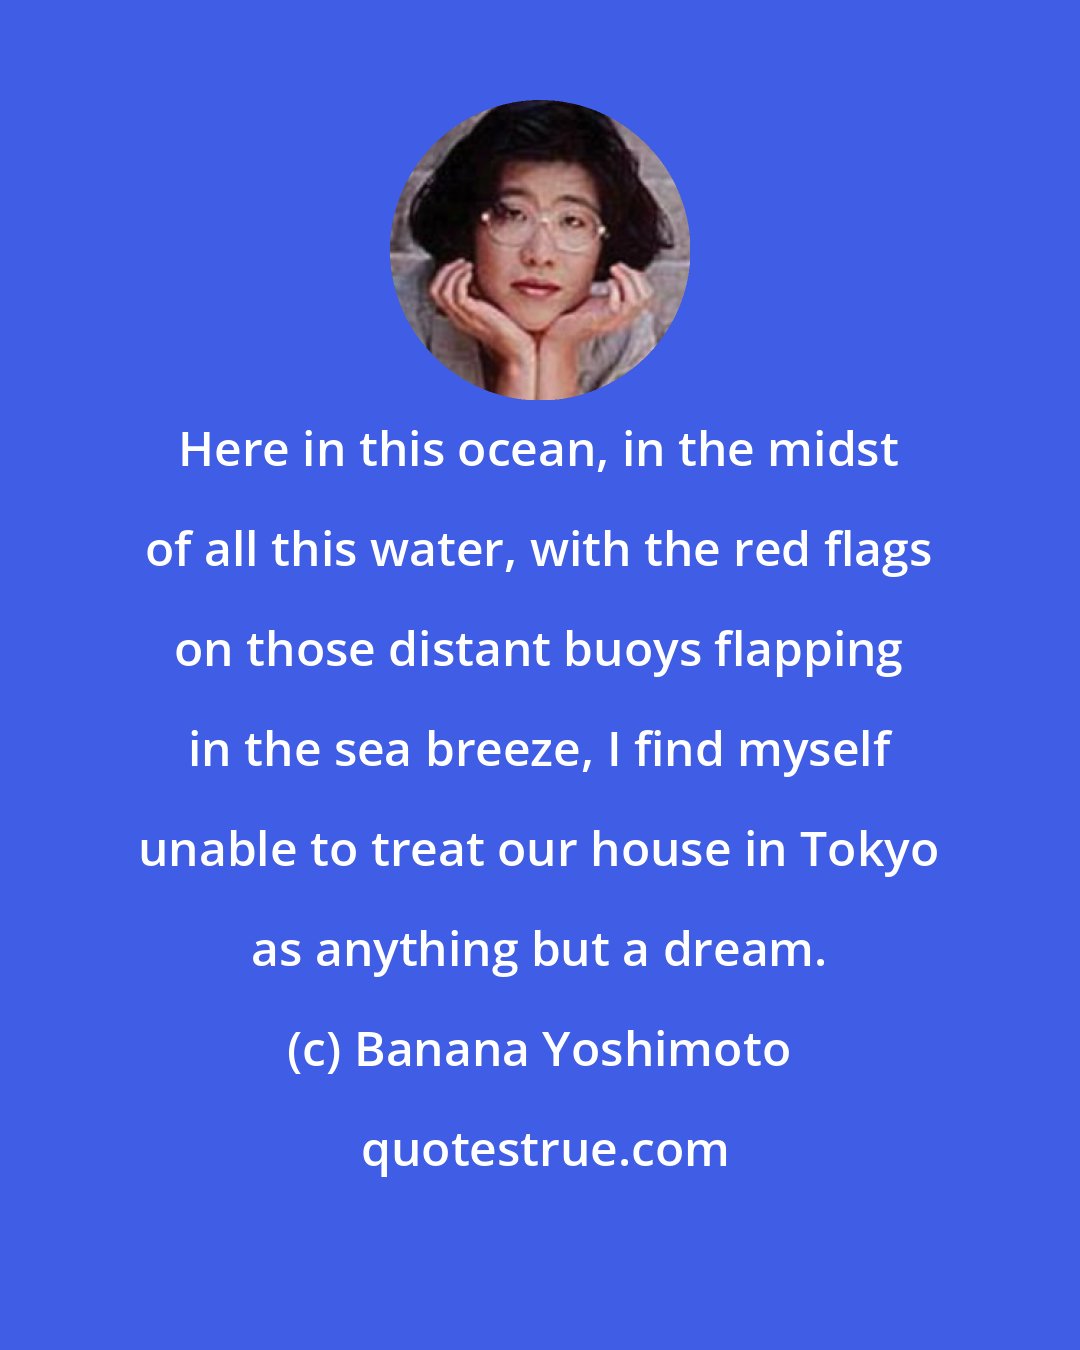 Banana Yoshimoto: Here in this ocean, in the midst of all this water, with the red flags on those distant buoys flapping in the sea breeze, I find myself unable to treat our house in Tokyo as anything but a dream.